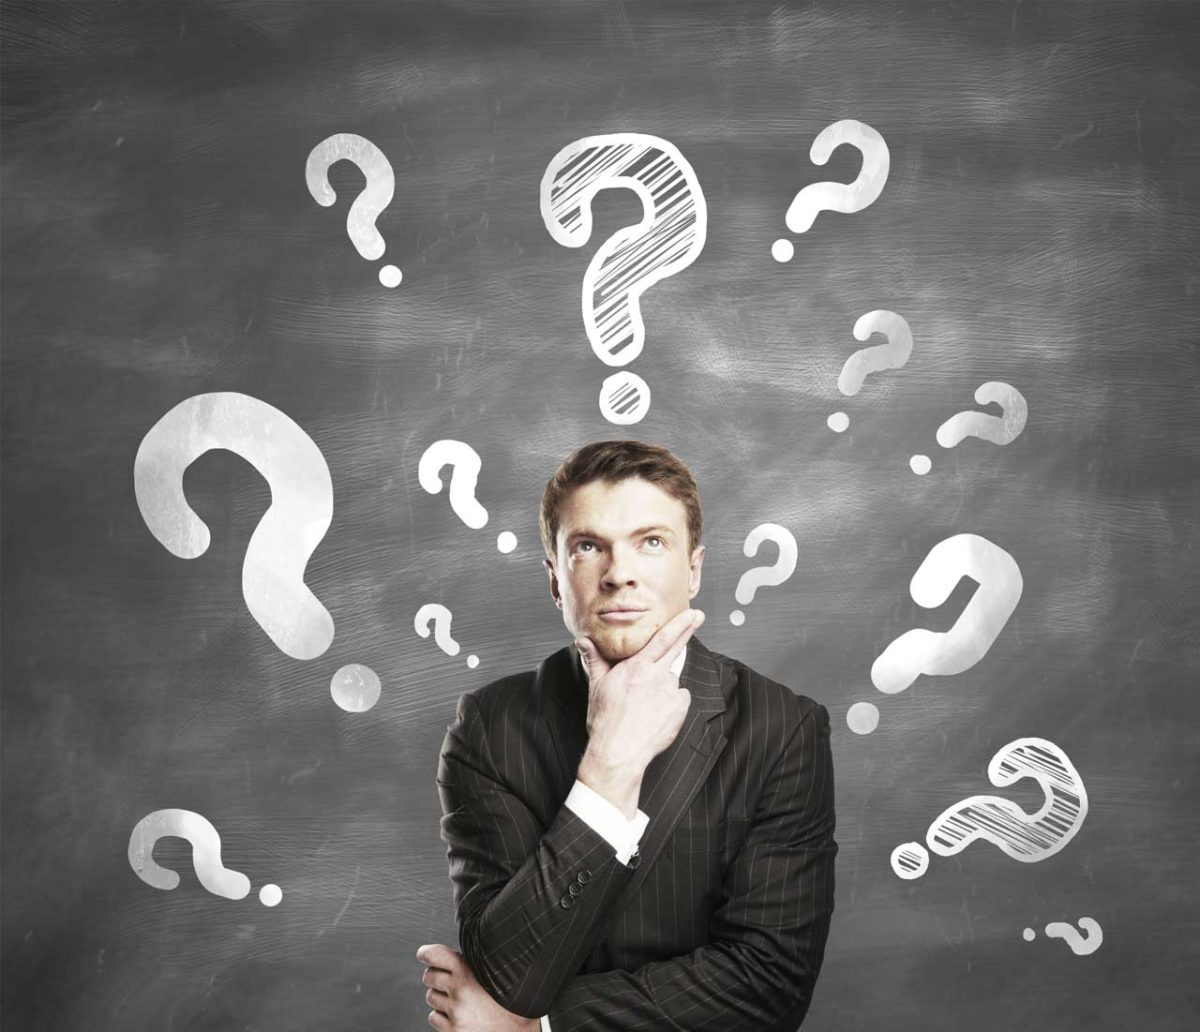 man with question marks overhead -leadership - where are we going and why?”